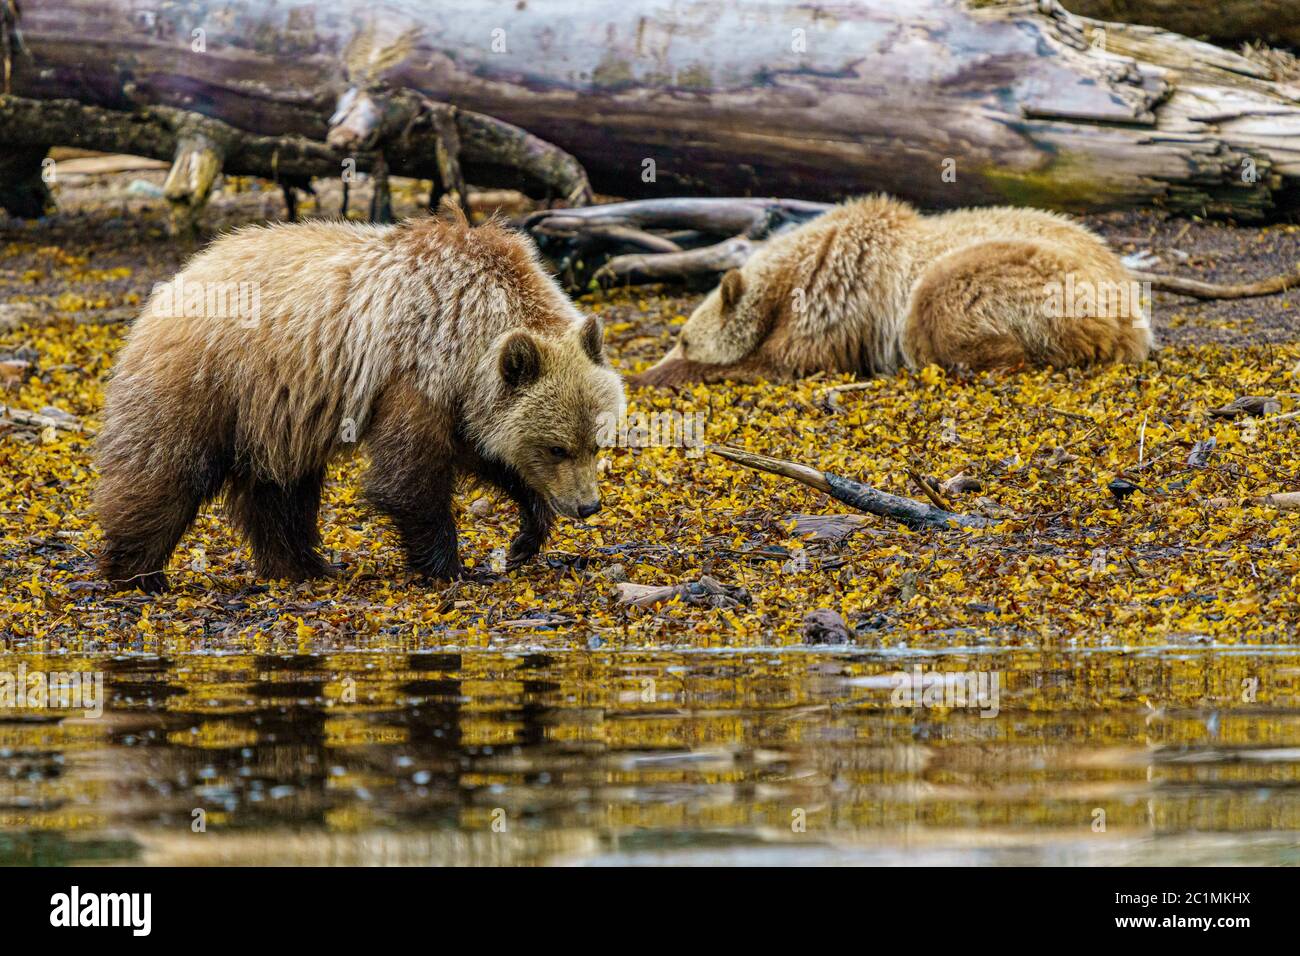 Grizzly bear cubs walkiong and resting along the intertal zone, Glendale Cove, First Nations Territory, British Columbia, Canada Stock Photo